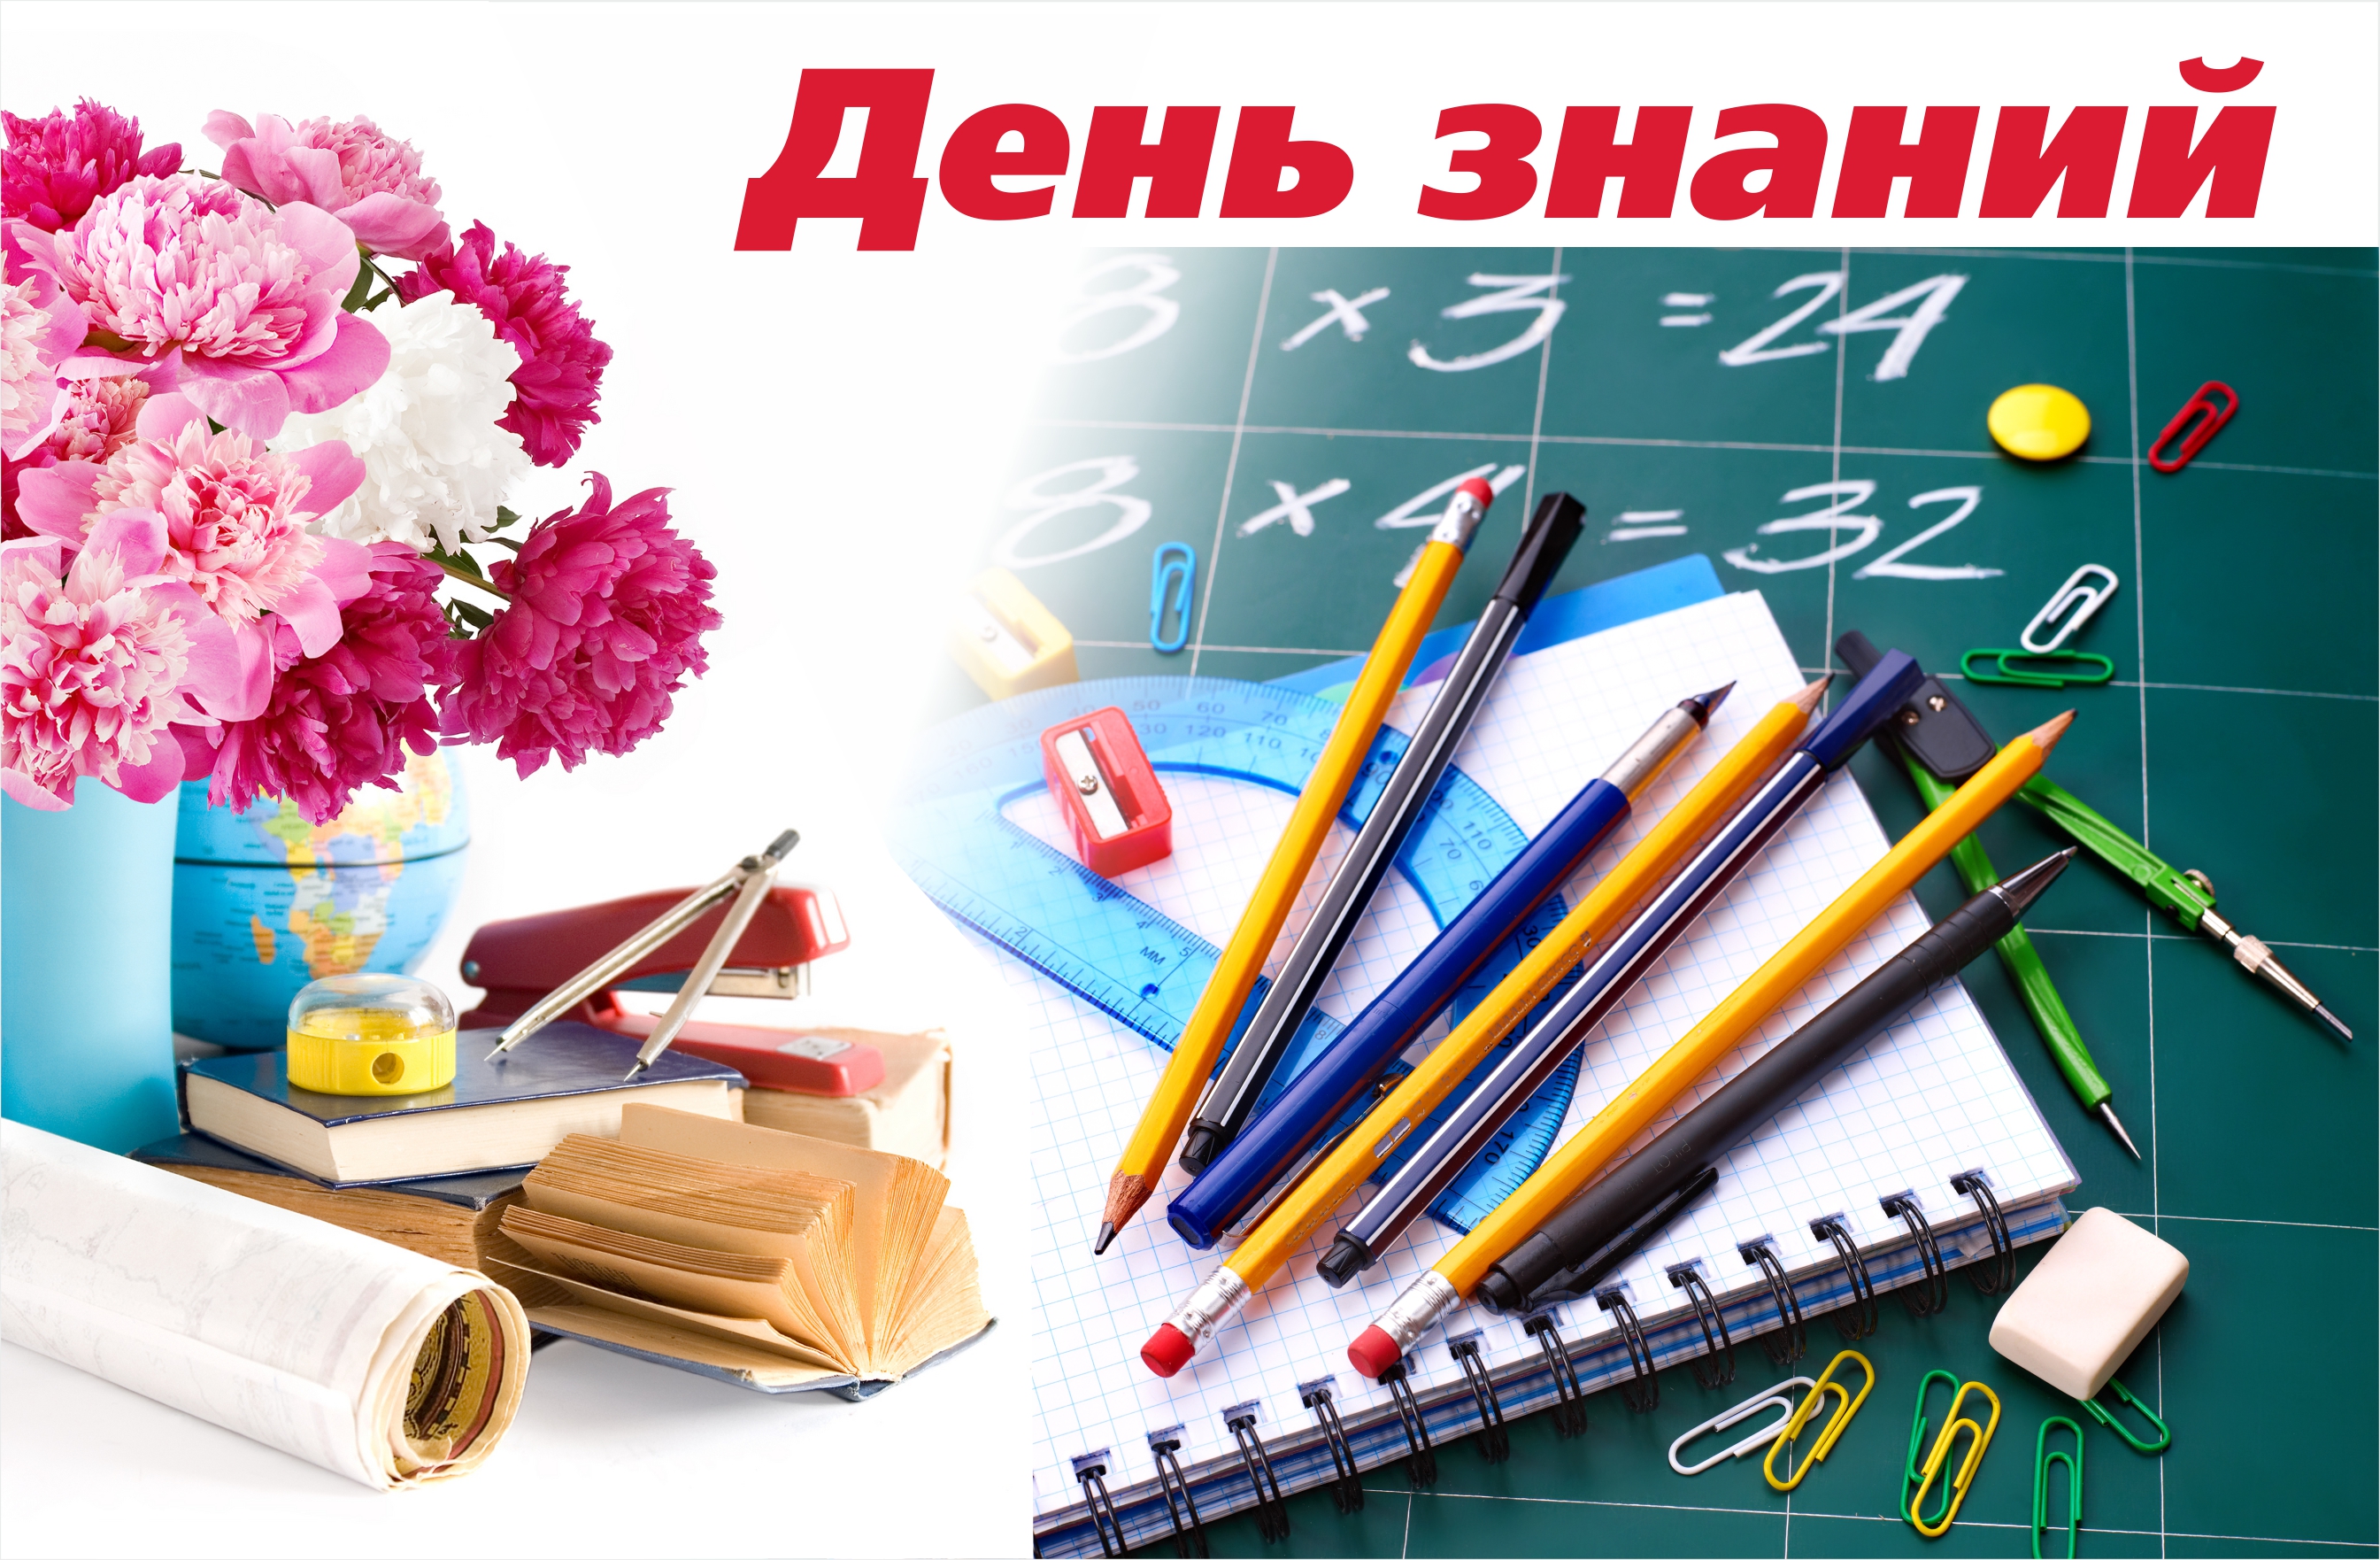 2019Holidays September 1 School supplies and a bouquet for the day of knowledge on September 1 134893 